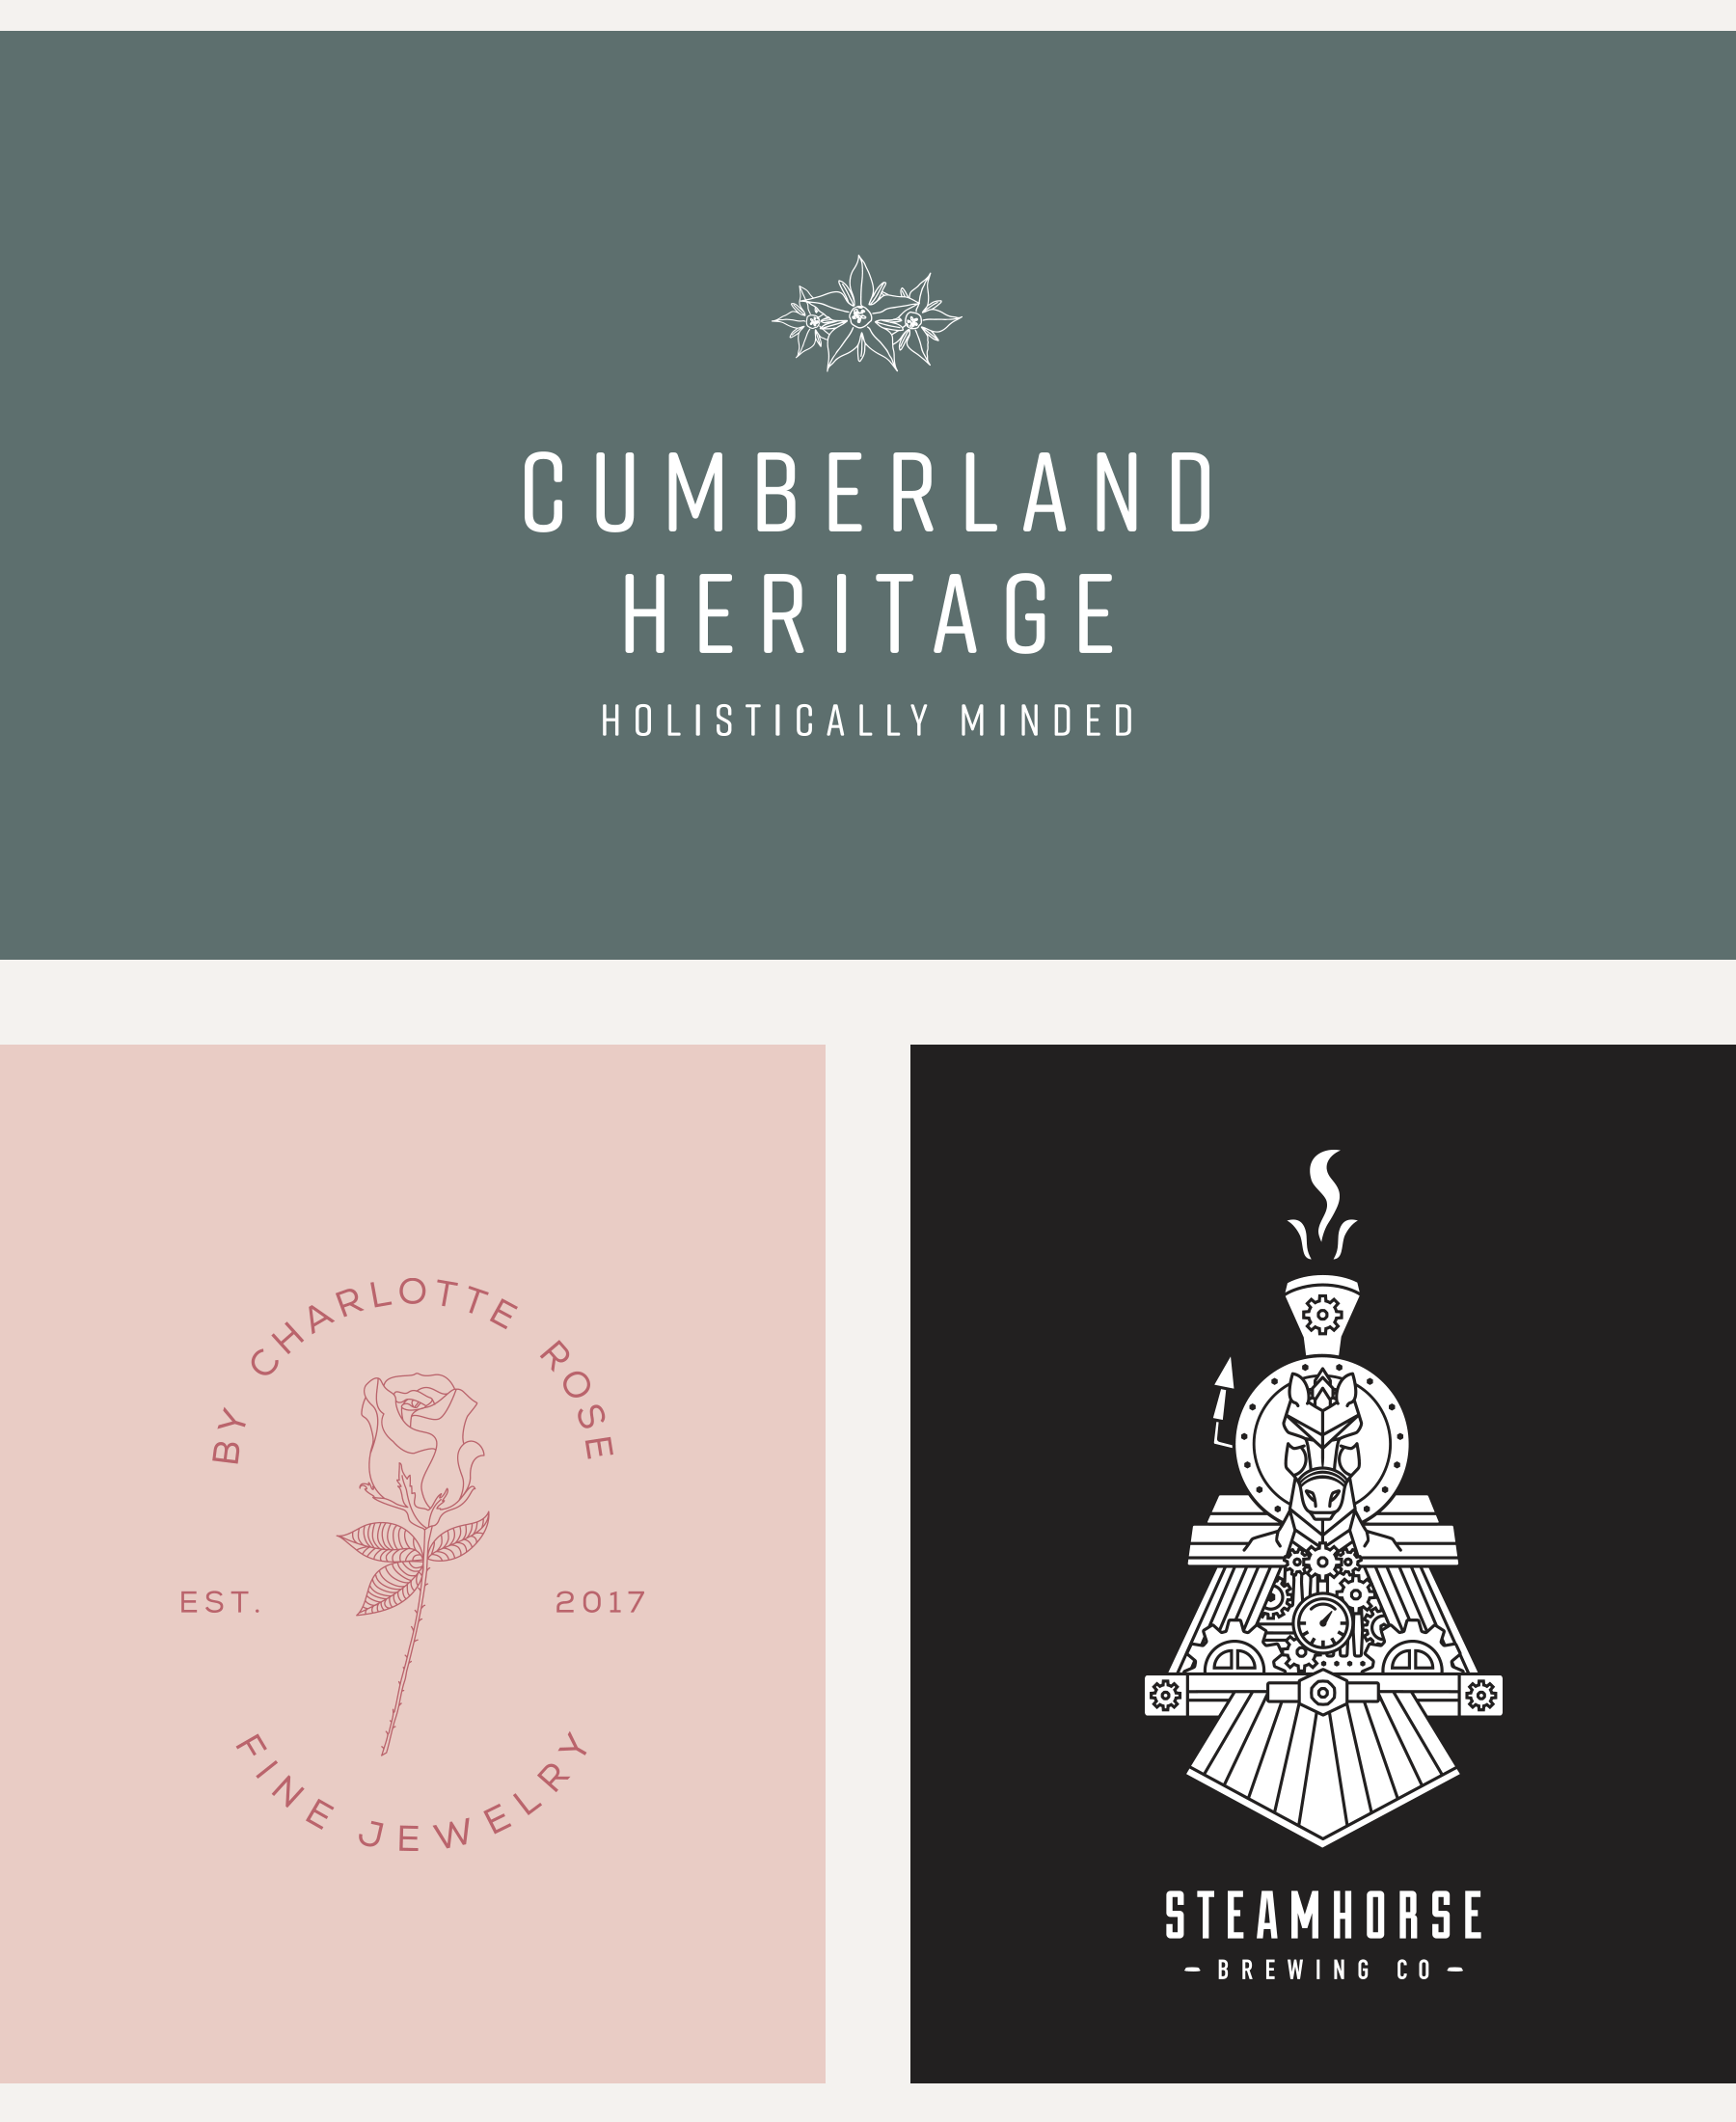 Animated logo variations of Cumberland Heritage with a variety of plant themed icons, Charlotte Rose with a rose & hand illustration, and Steamhorse with a custom steam-train / horse illustration.